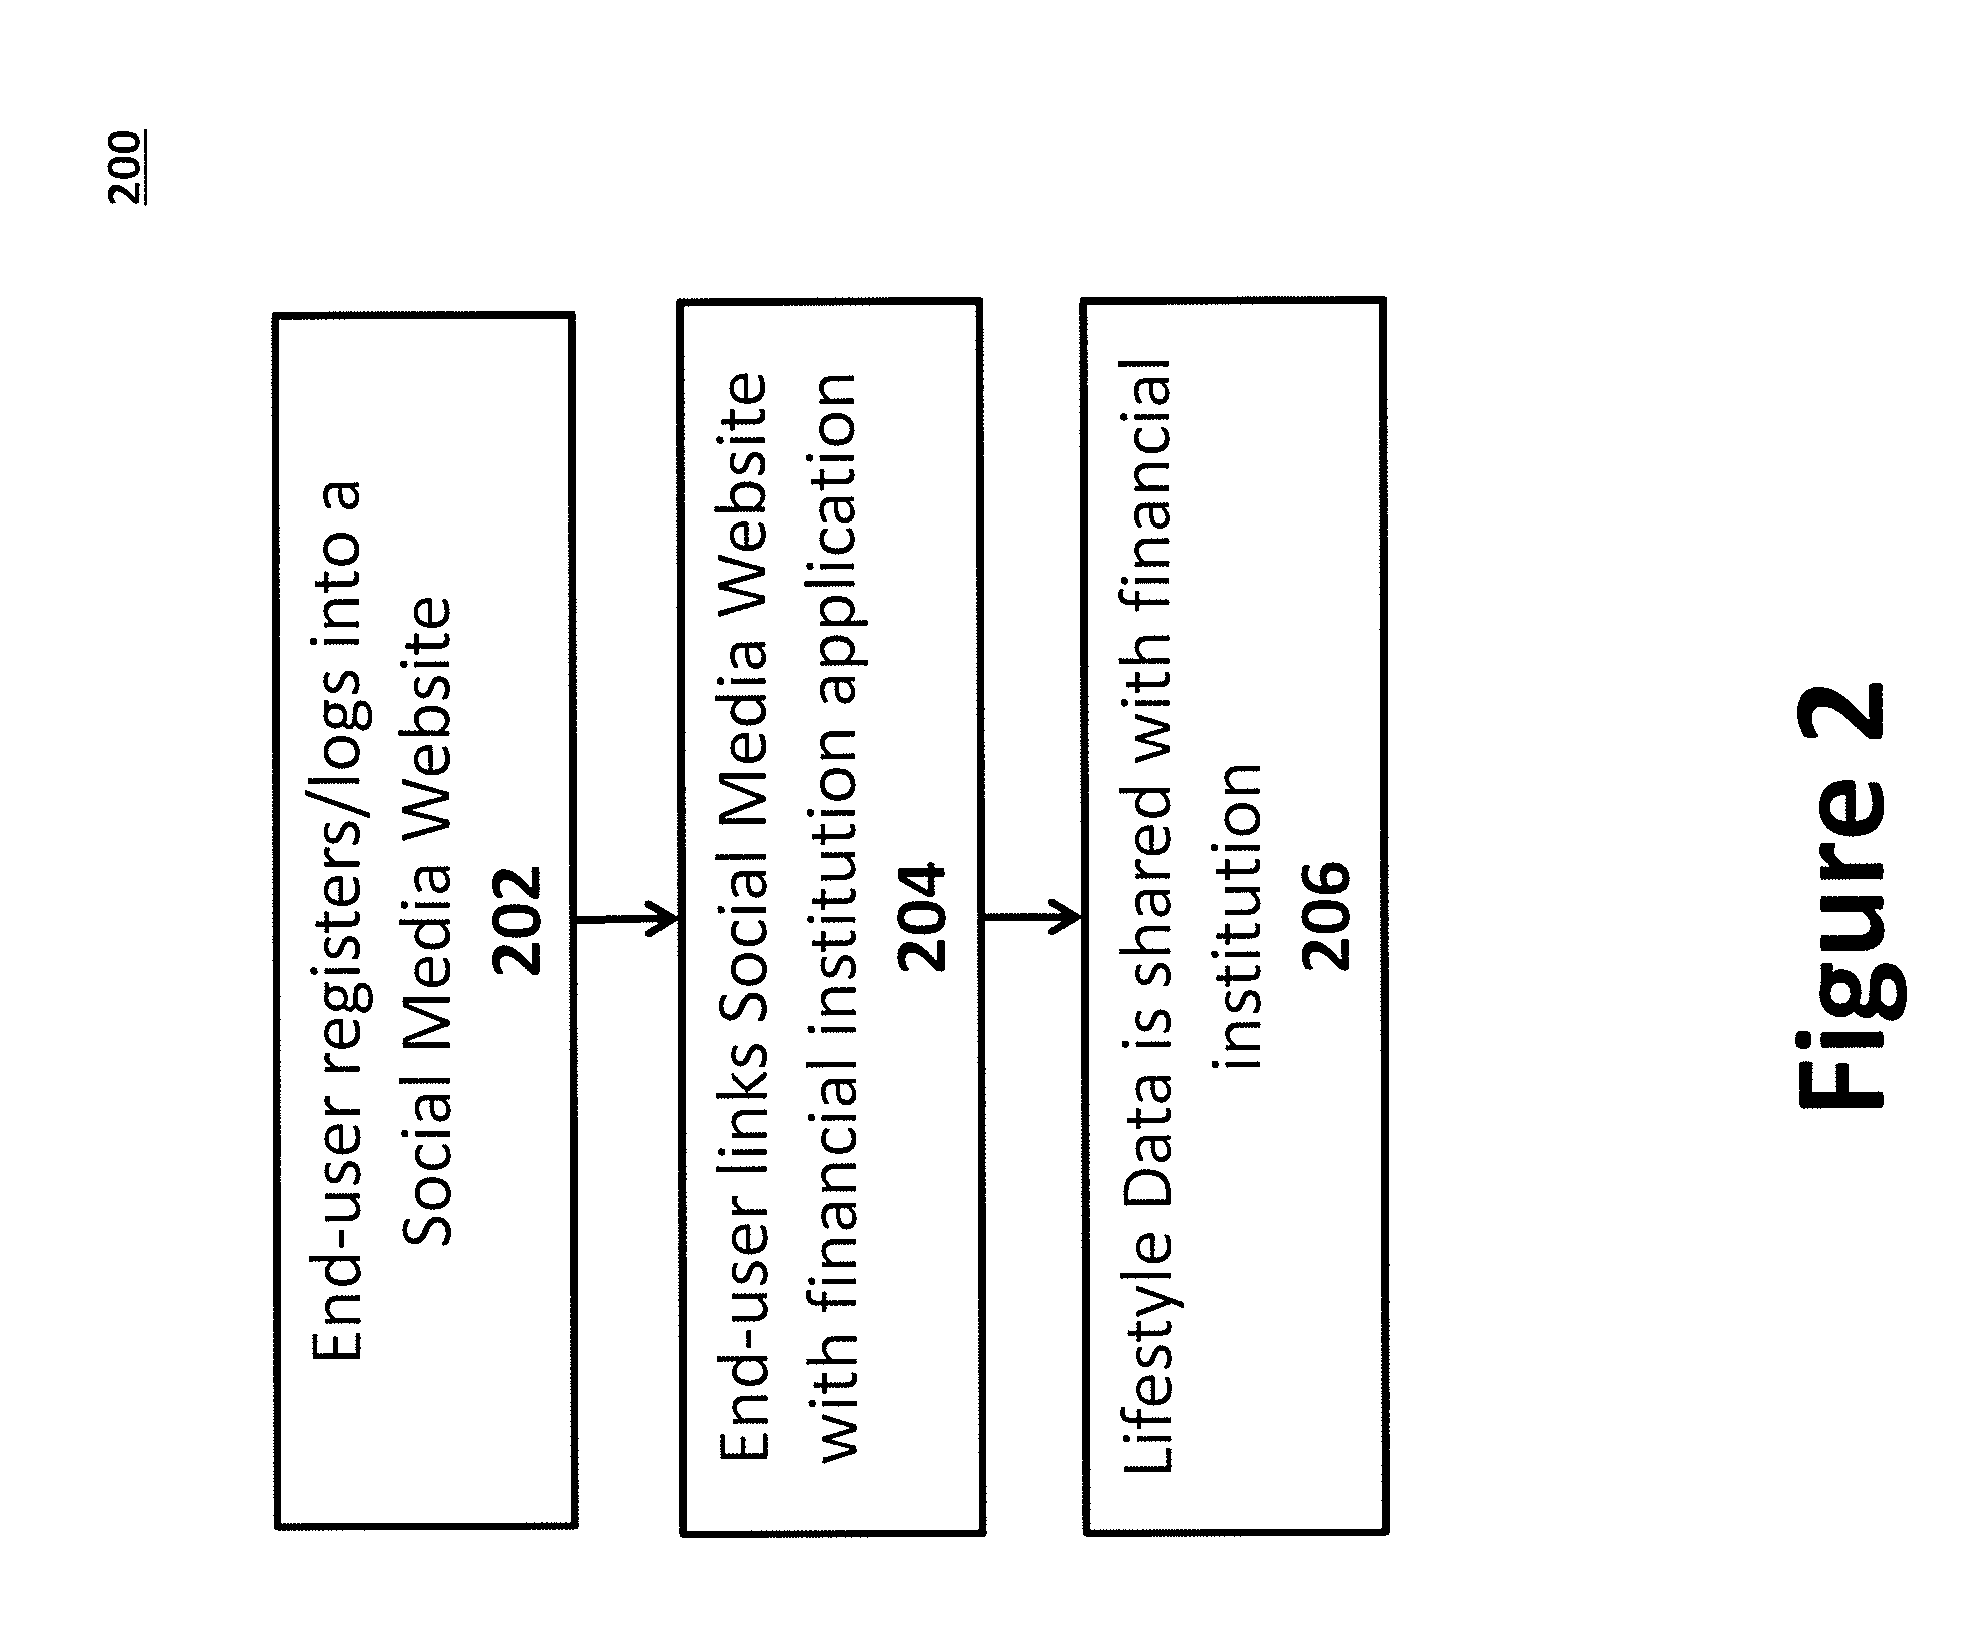 System and Method for Enhanced Transaction Authorization